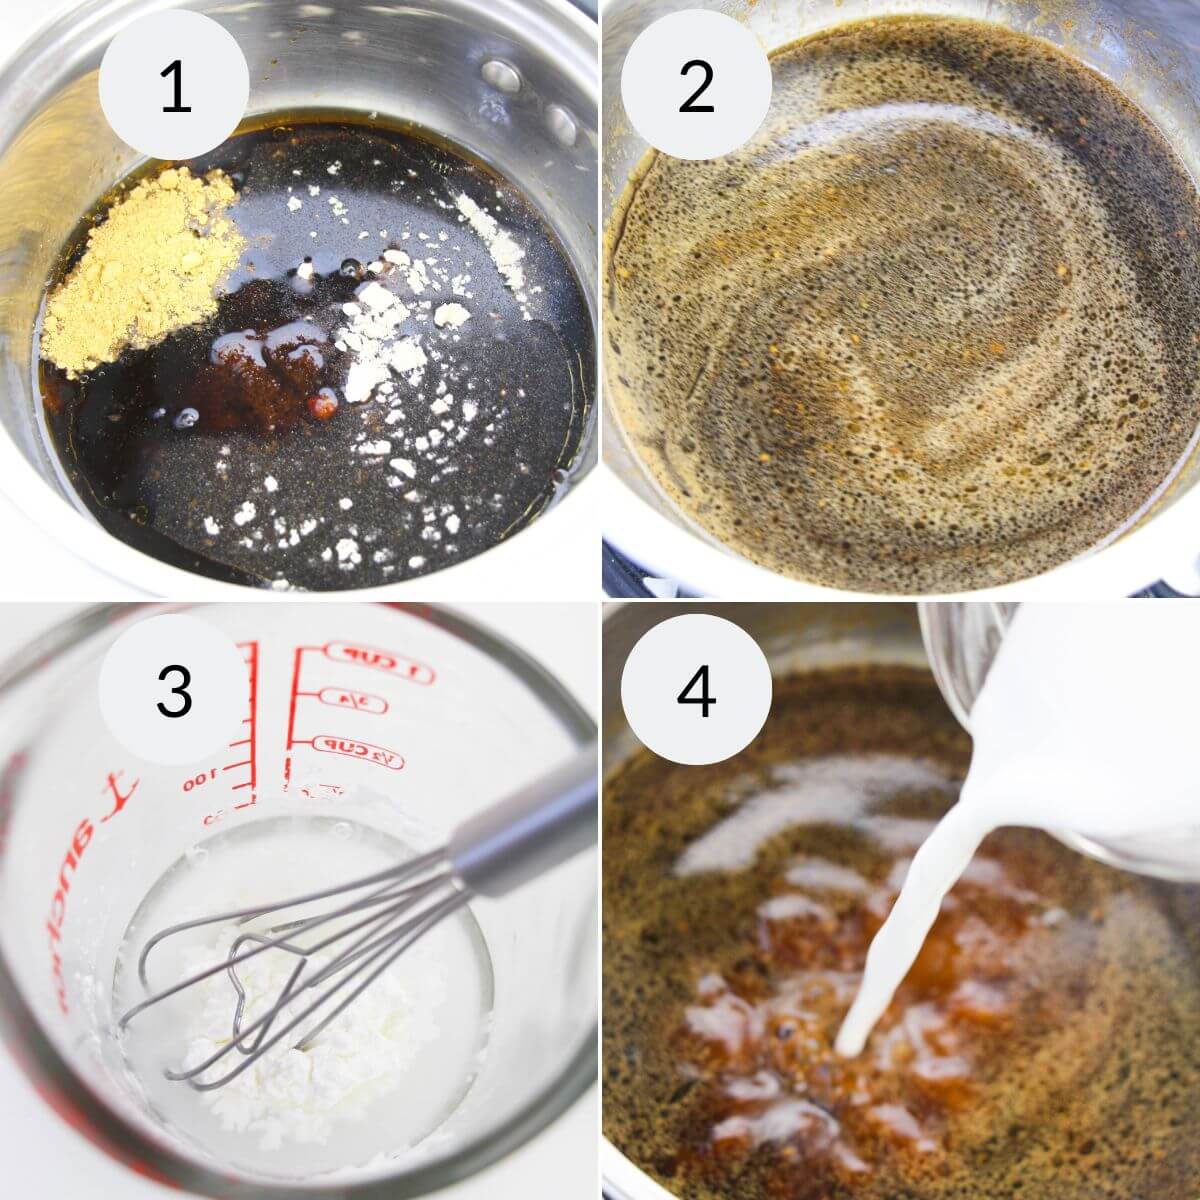 Step-by-step instructions for preparing Maple Glazed Salmon, showing the addition of different ingredients in a bowl.